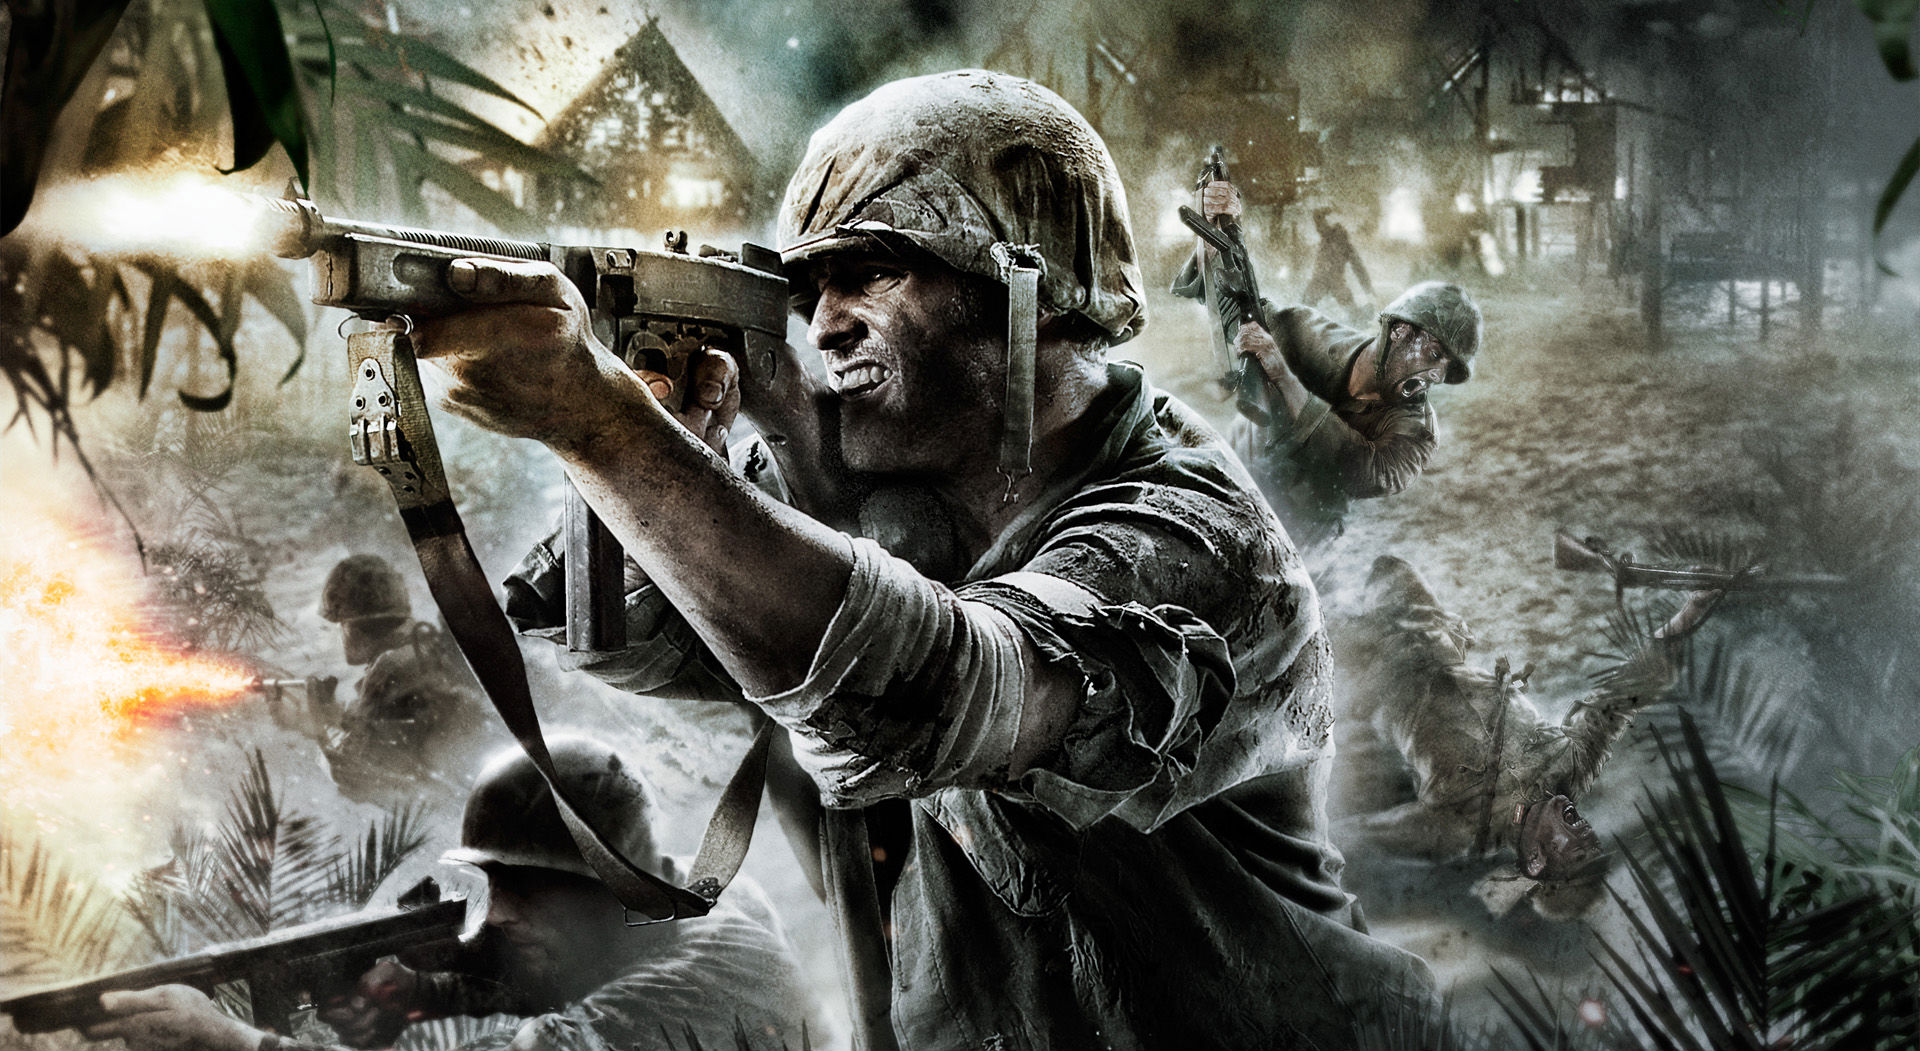 Call of Duty PC Wallpapers - Top Free Call of Duty PC Backgrounds